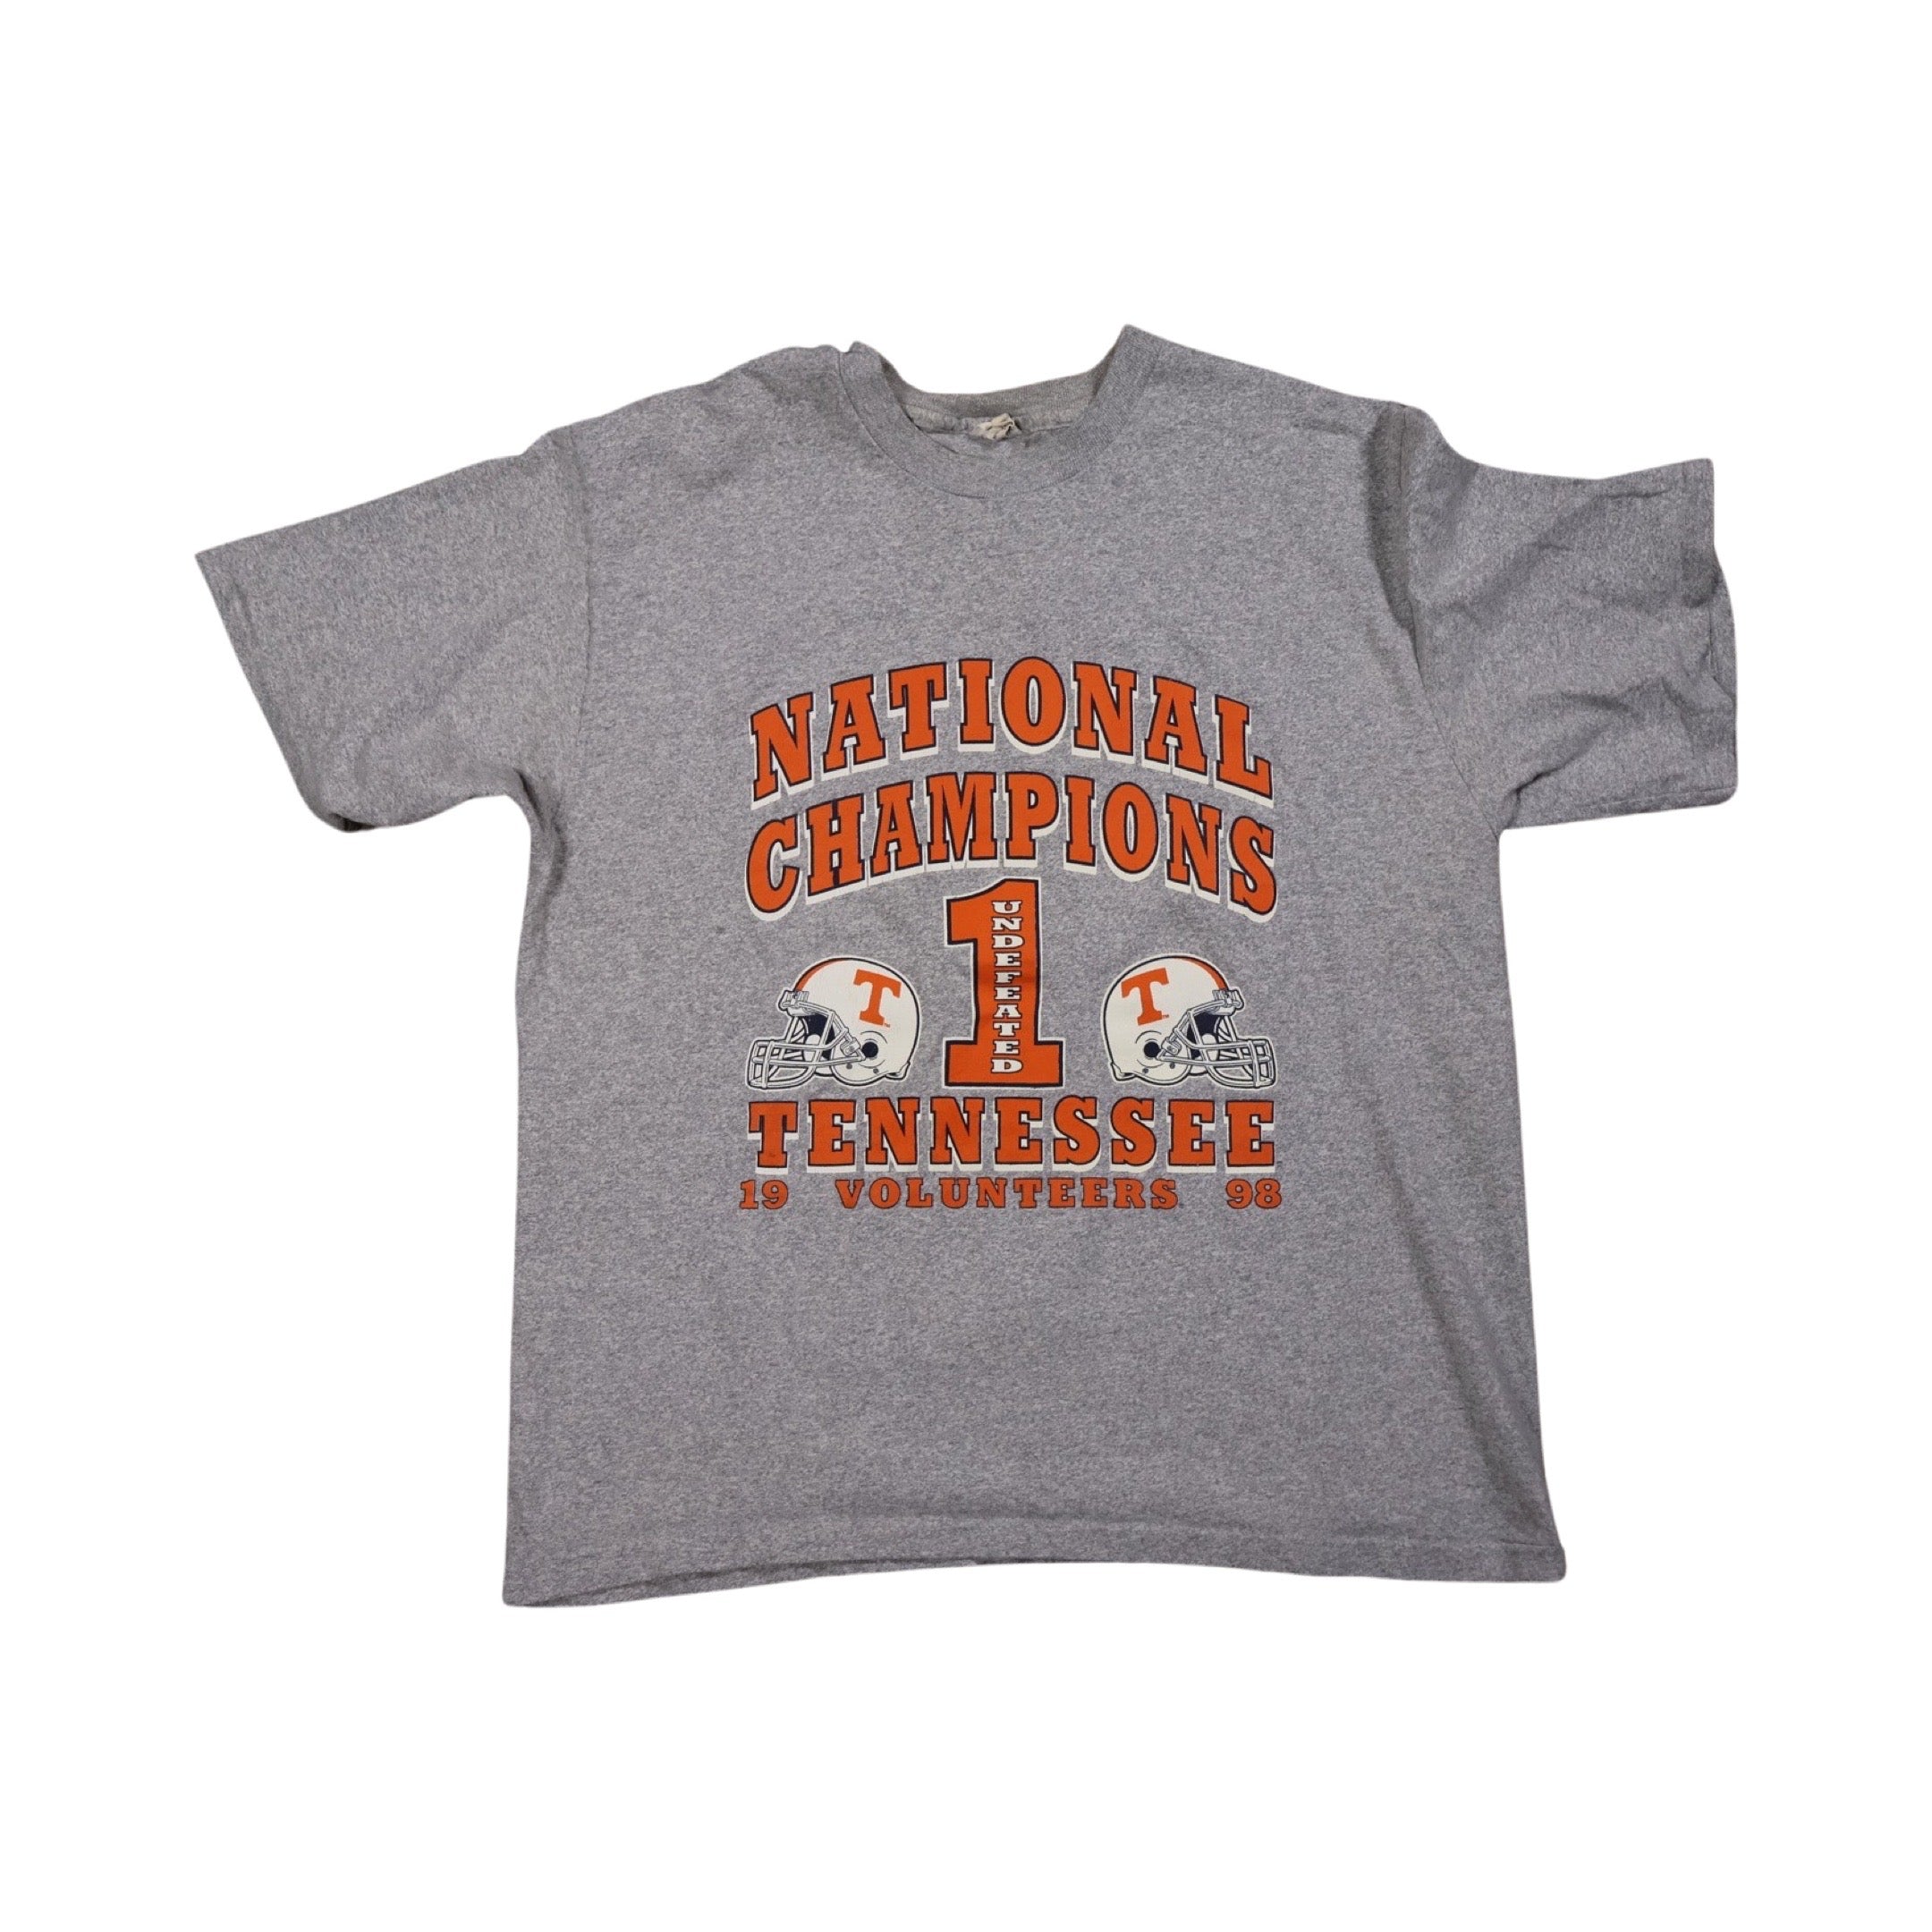 Tennessee Volunteers 1998 National Champs T-Shirt (XL)